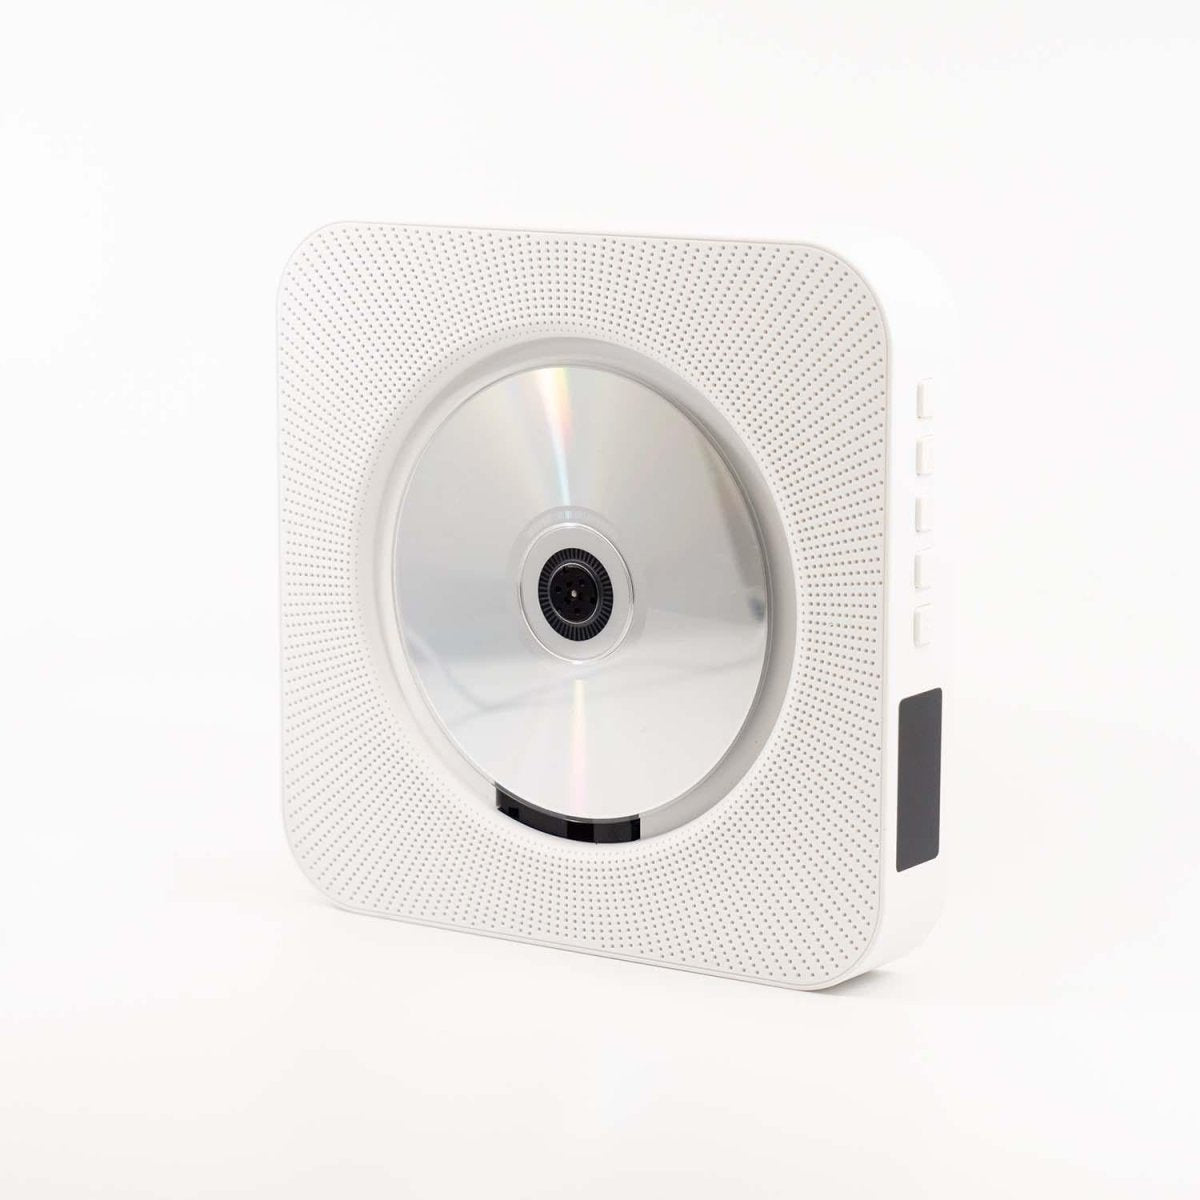 Win a SQUARE CD player! - KAVE SQUARE